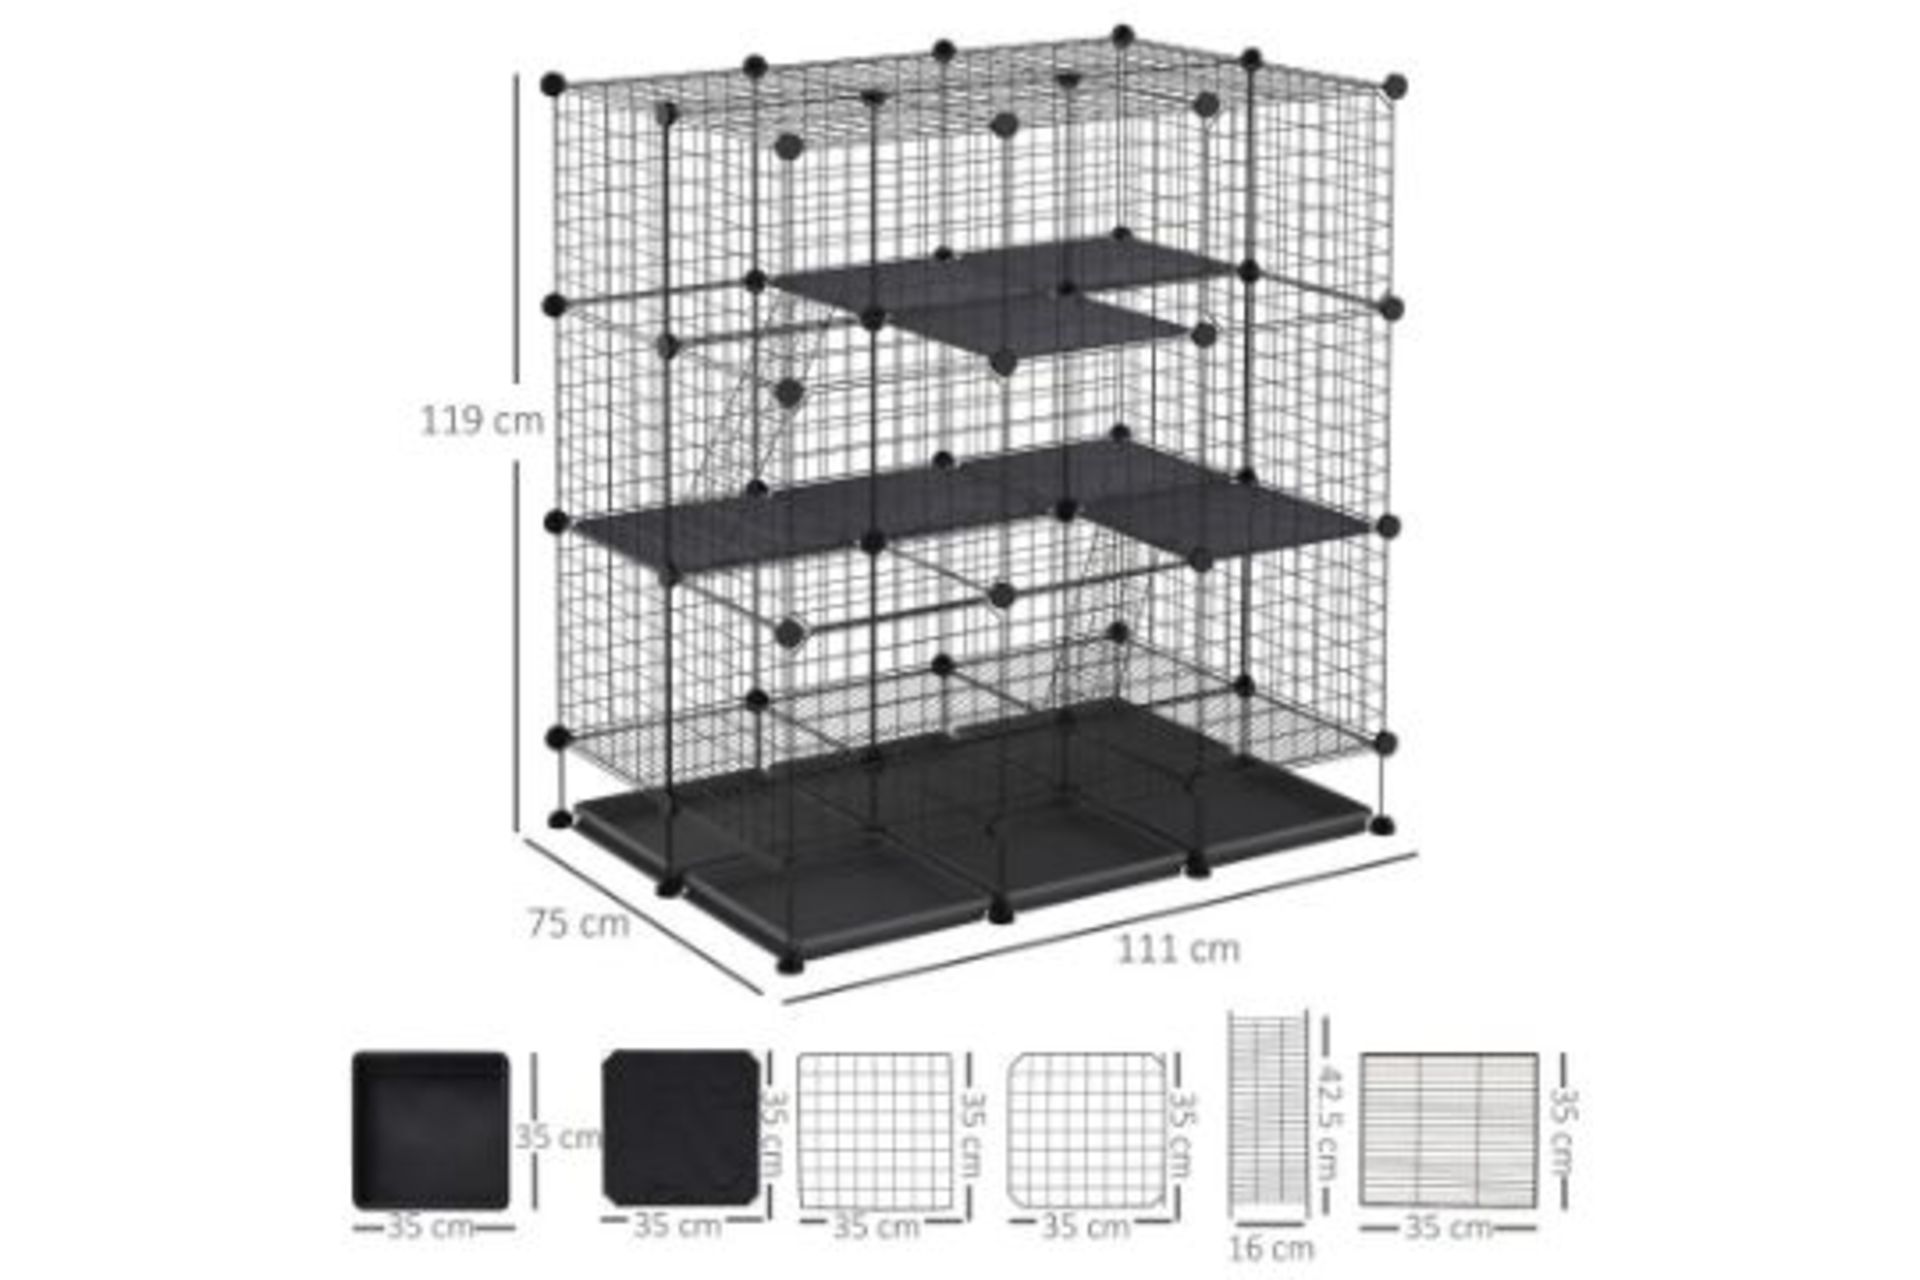 RRP £67.99 - PawHut Steel 3-Tier Small Animal Playpen Cage Black - DIMENSIONS: Recommended: 119H x - Image 2 of 4